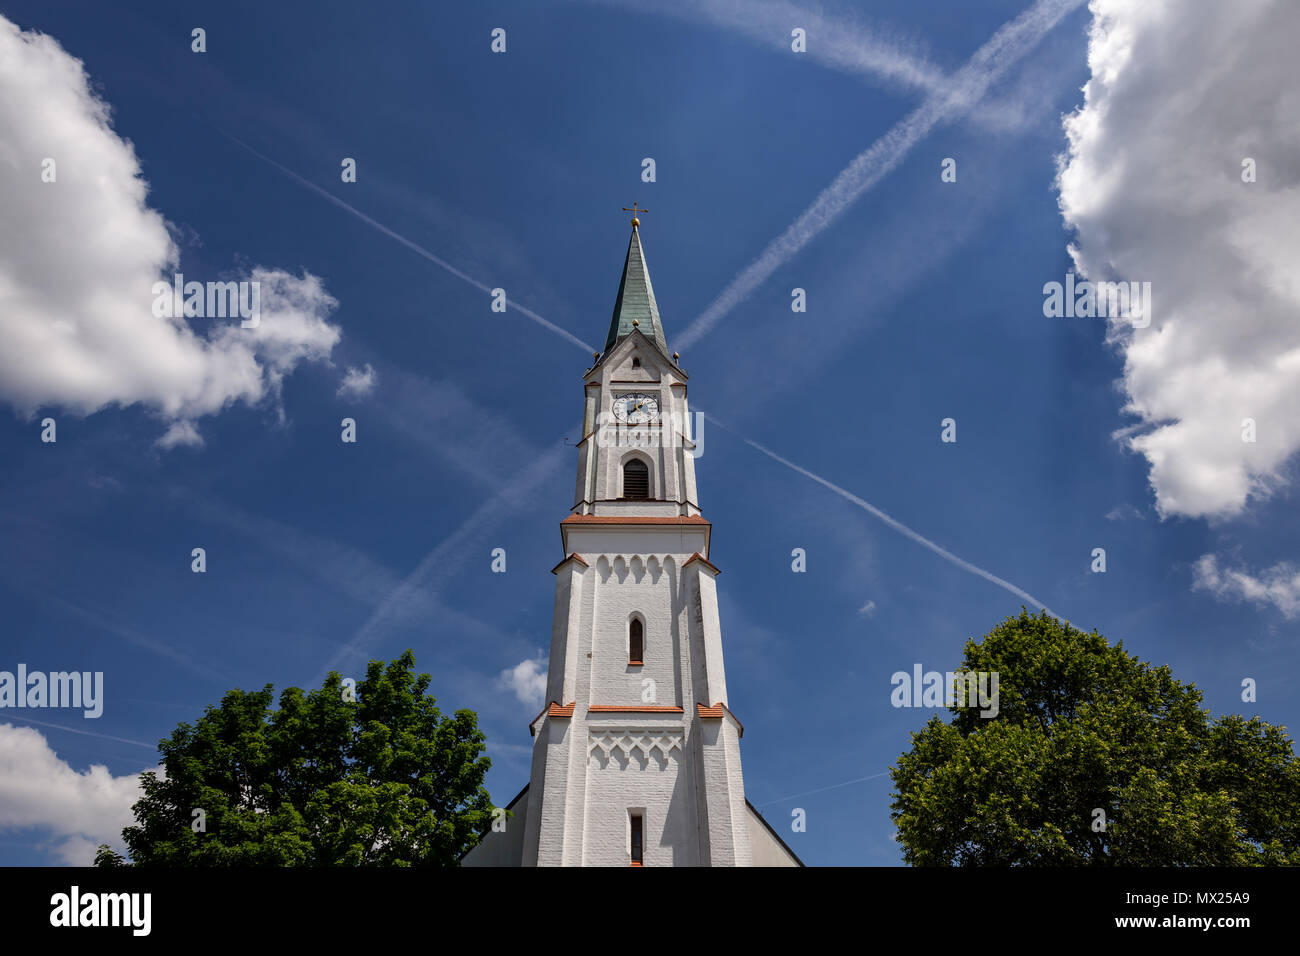 St.-Georg church in Gerzen, Bavaria, Germany with blue sky, clouds and contrails in the background Stock Photo